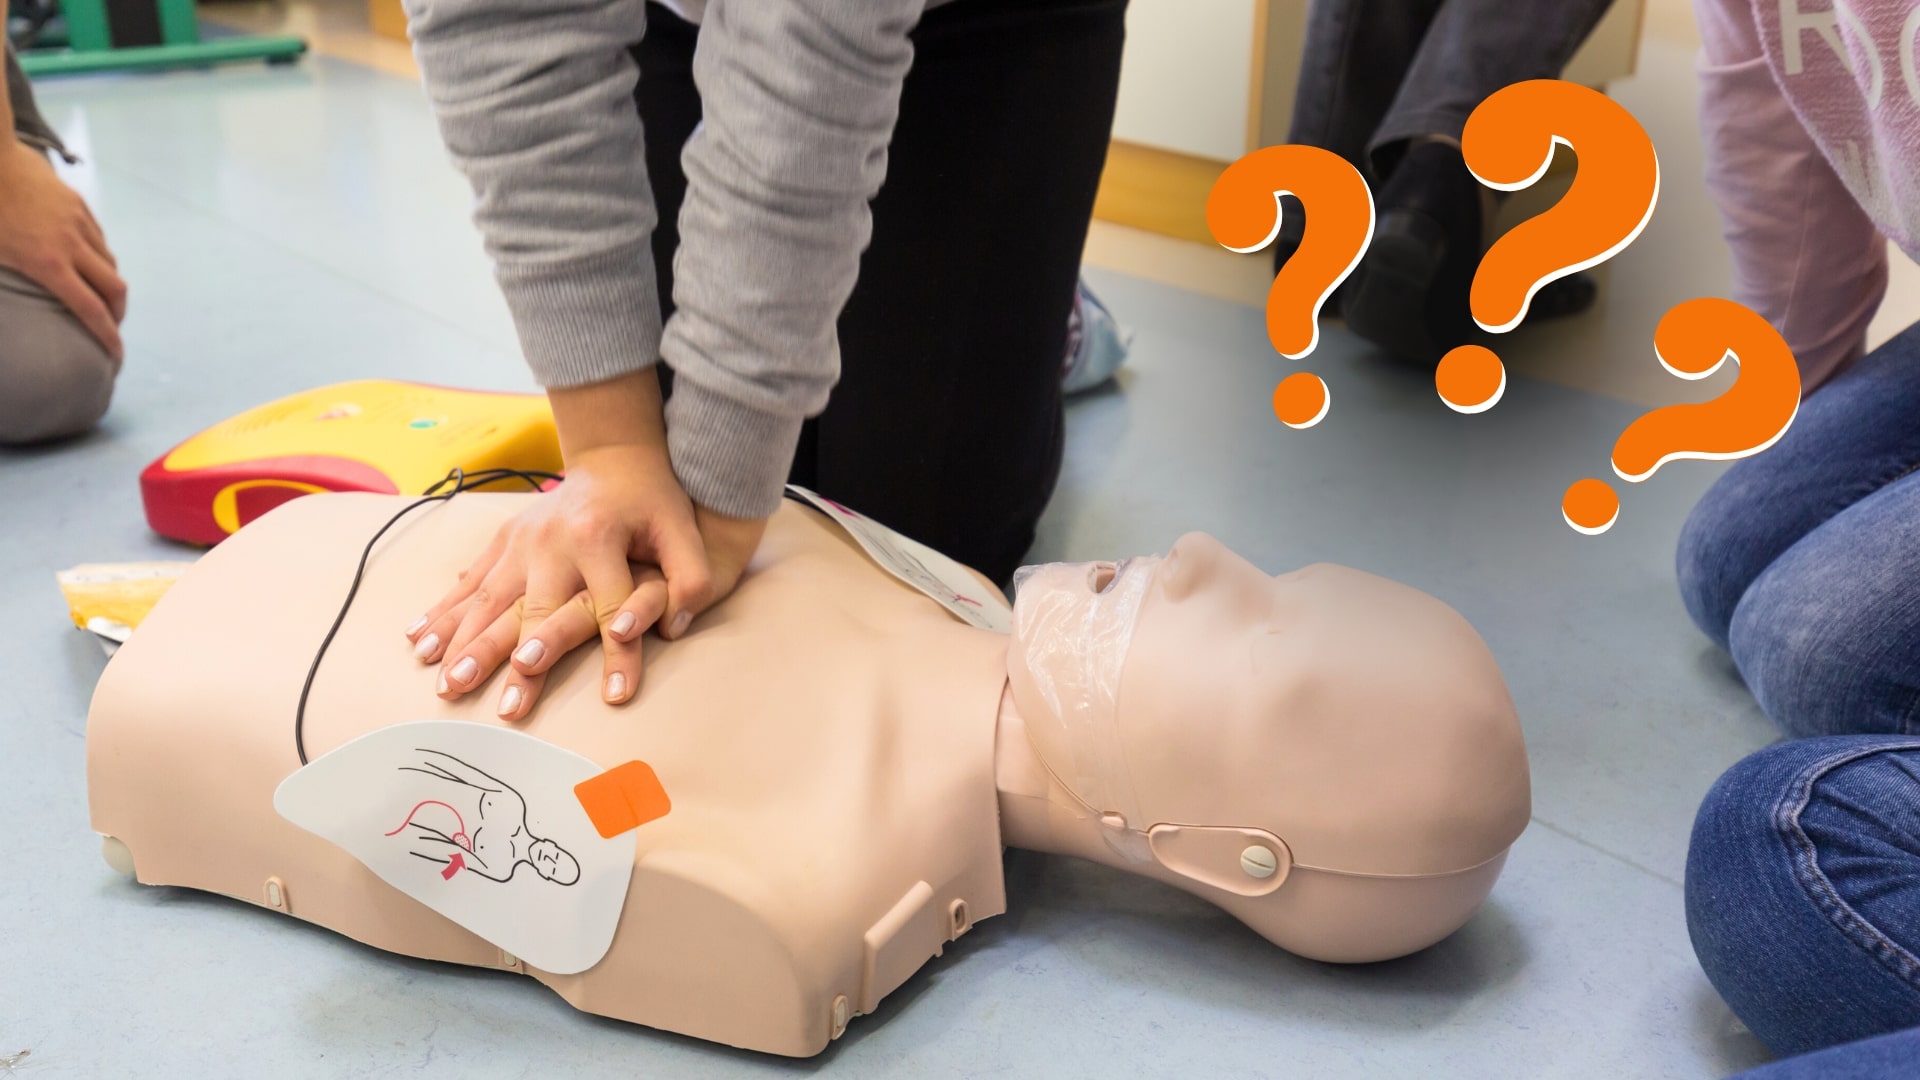 10 most frequently asked questions in first aid